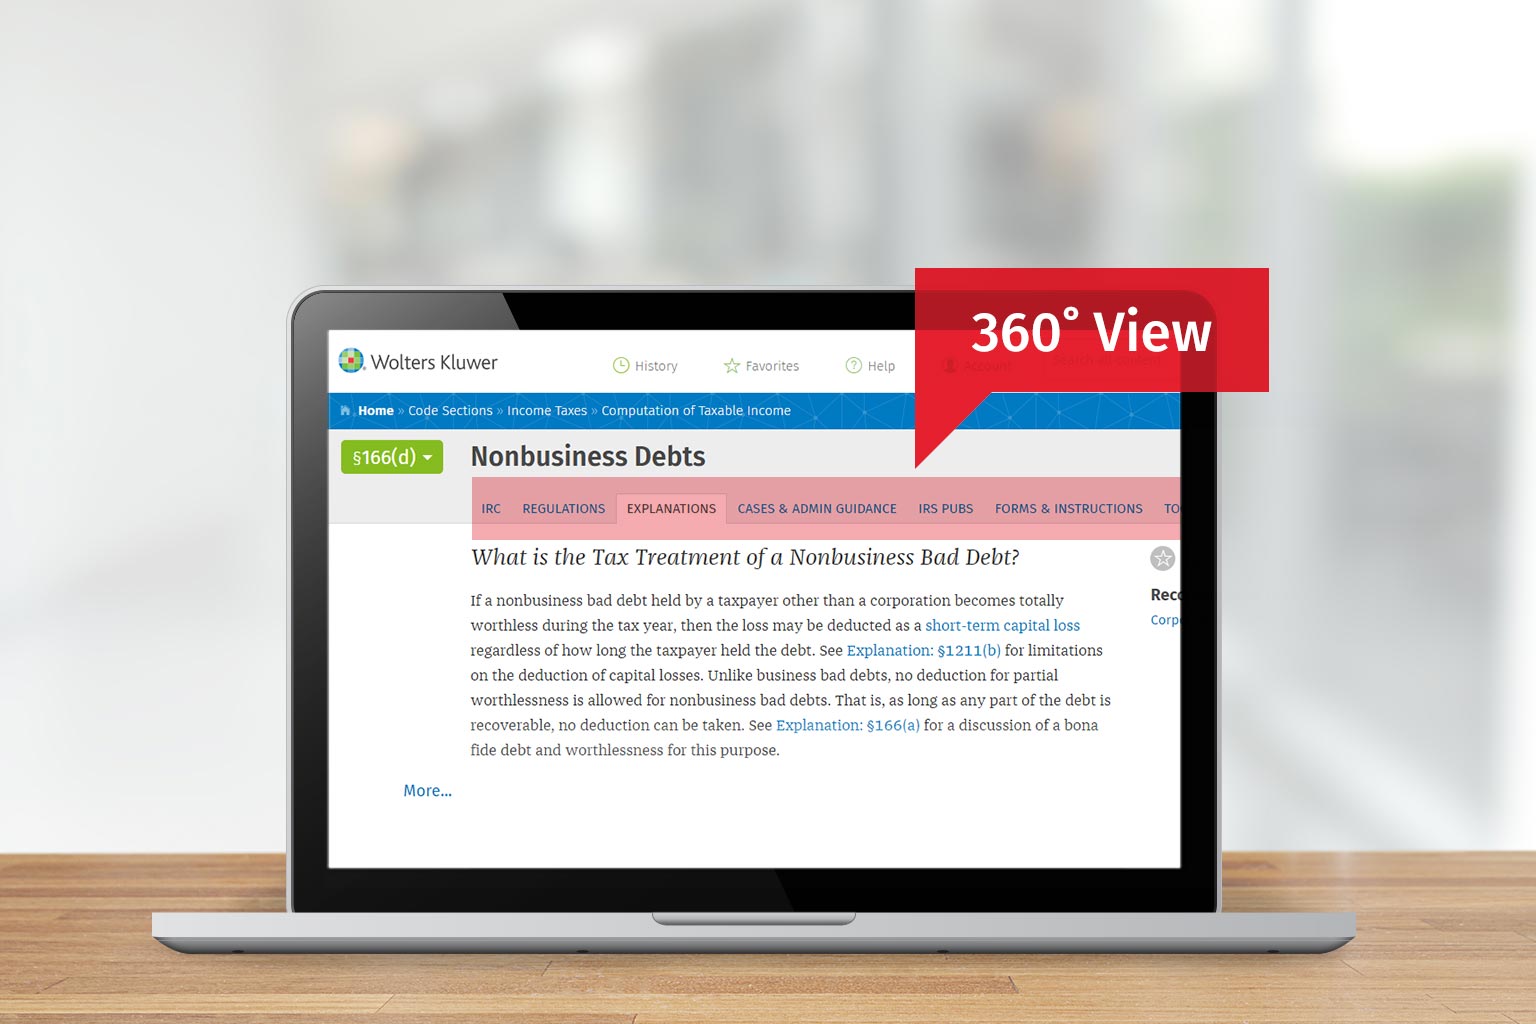 360 View in AnswerConnect